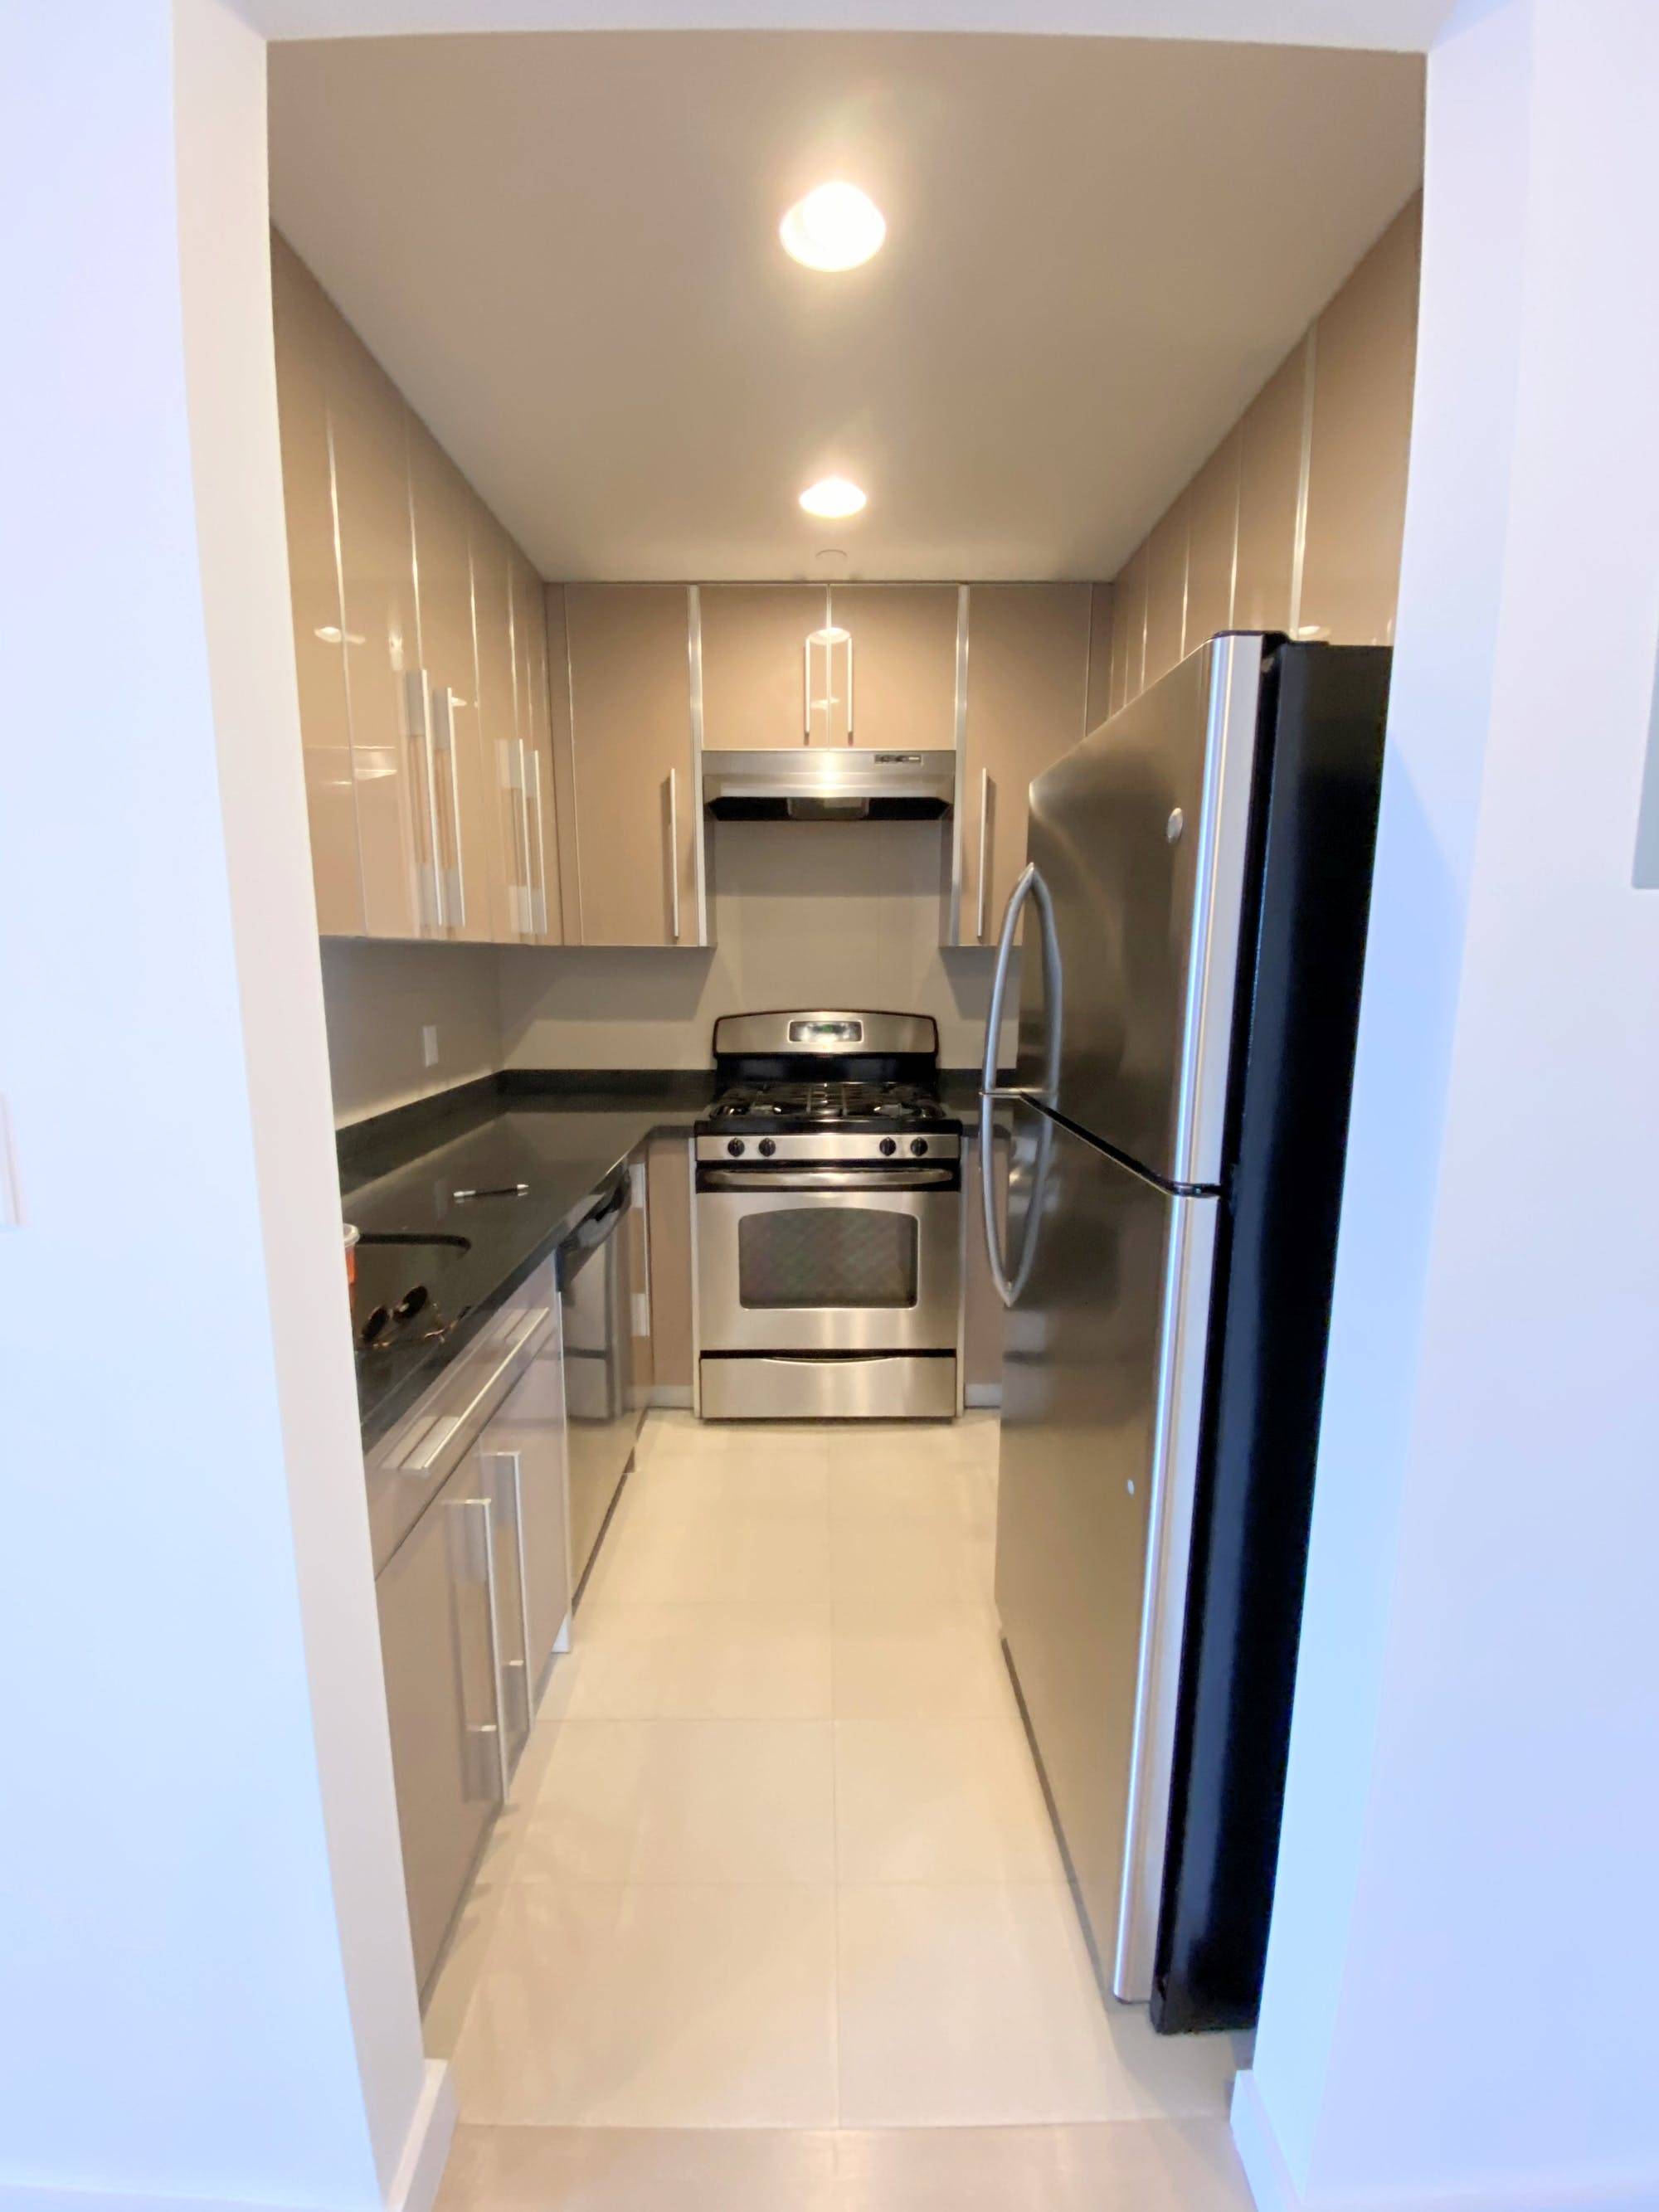 SHOWN BY APPOINTMENT ONLY NO FEE and 1 Month FREE Incredible opportunity to rent a large 1 bedroom apartment with 2 full bathrooms with a large private terrace.